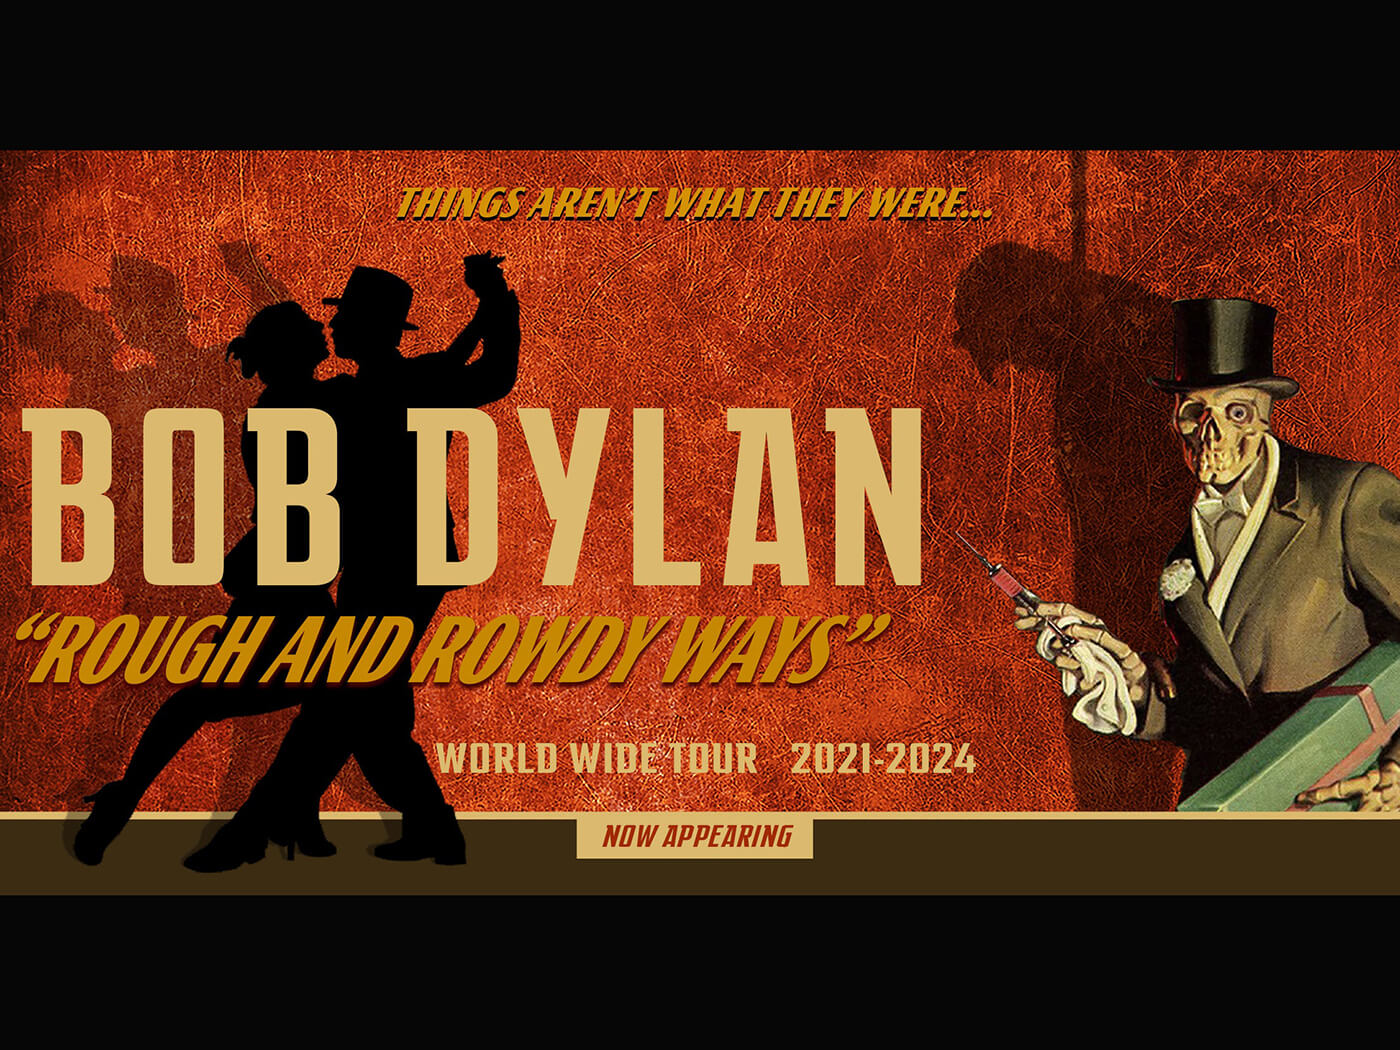 Bob Dylan’s Rough And Rowdy Ways Tour continues! Show 5: Flensburg